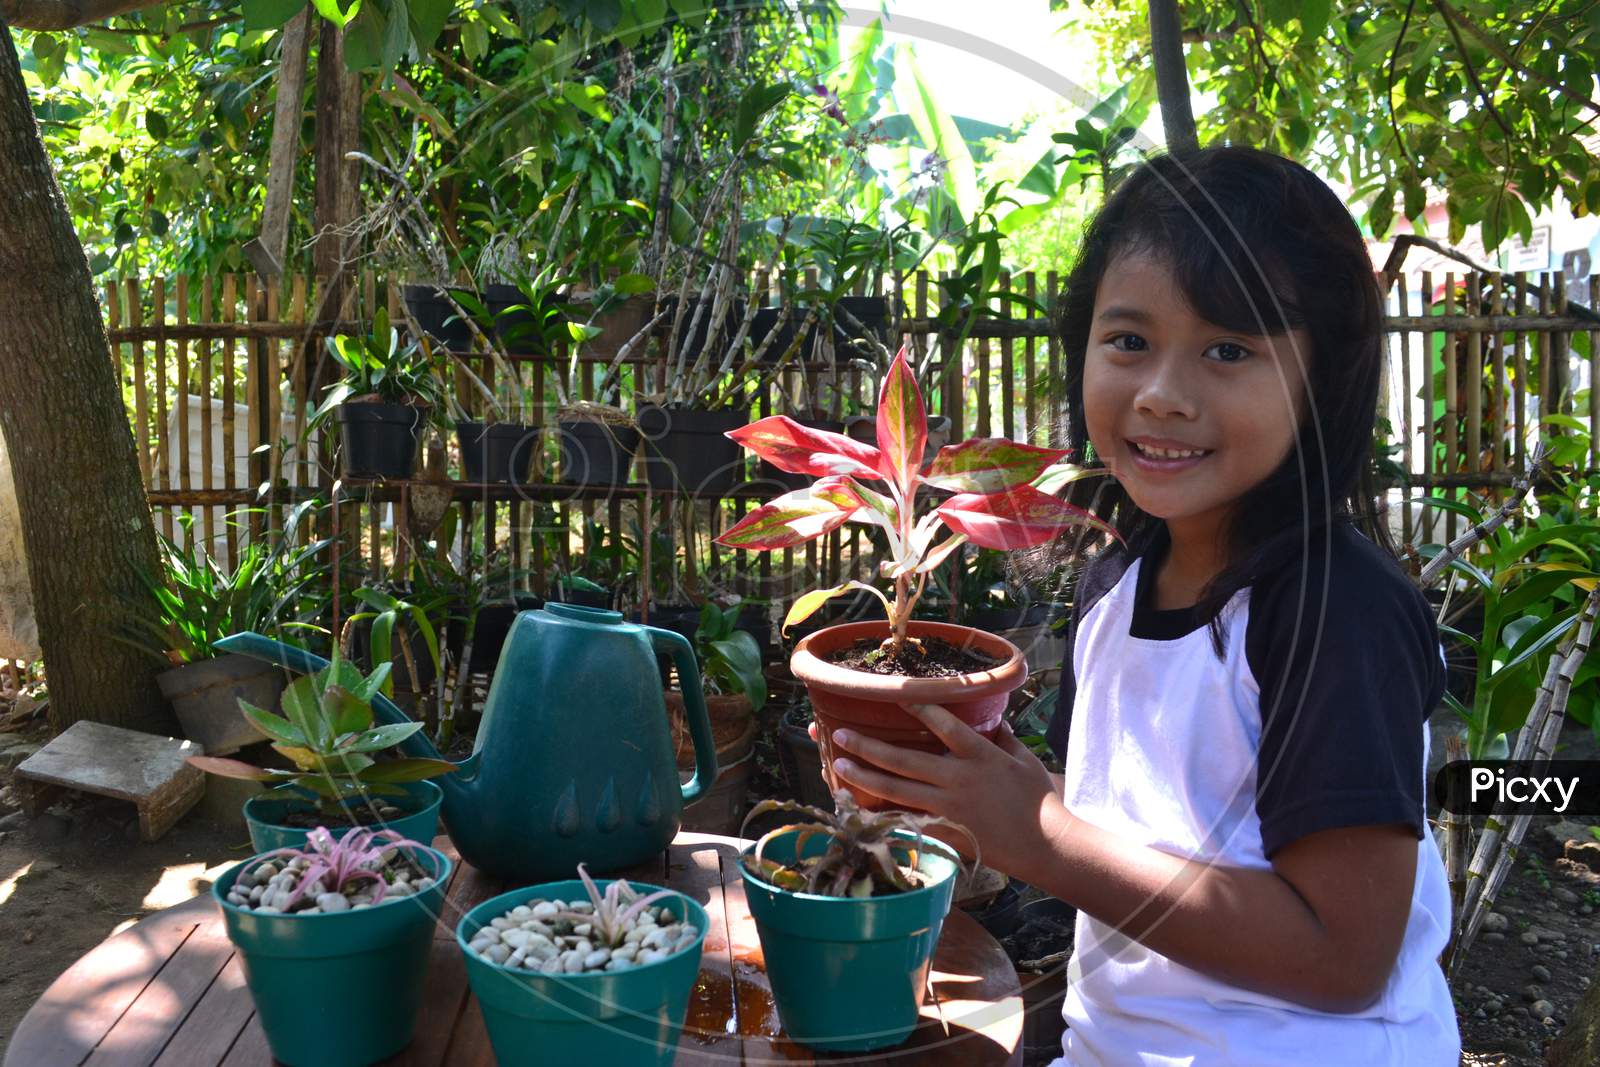 Toothy Asian Little Girl Sit While Holding A Potted Decorative Plant